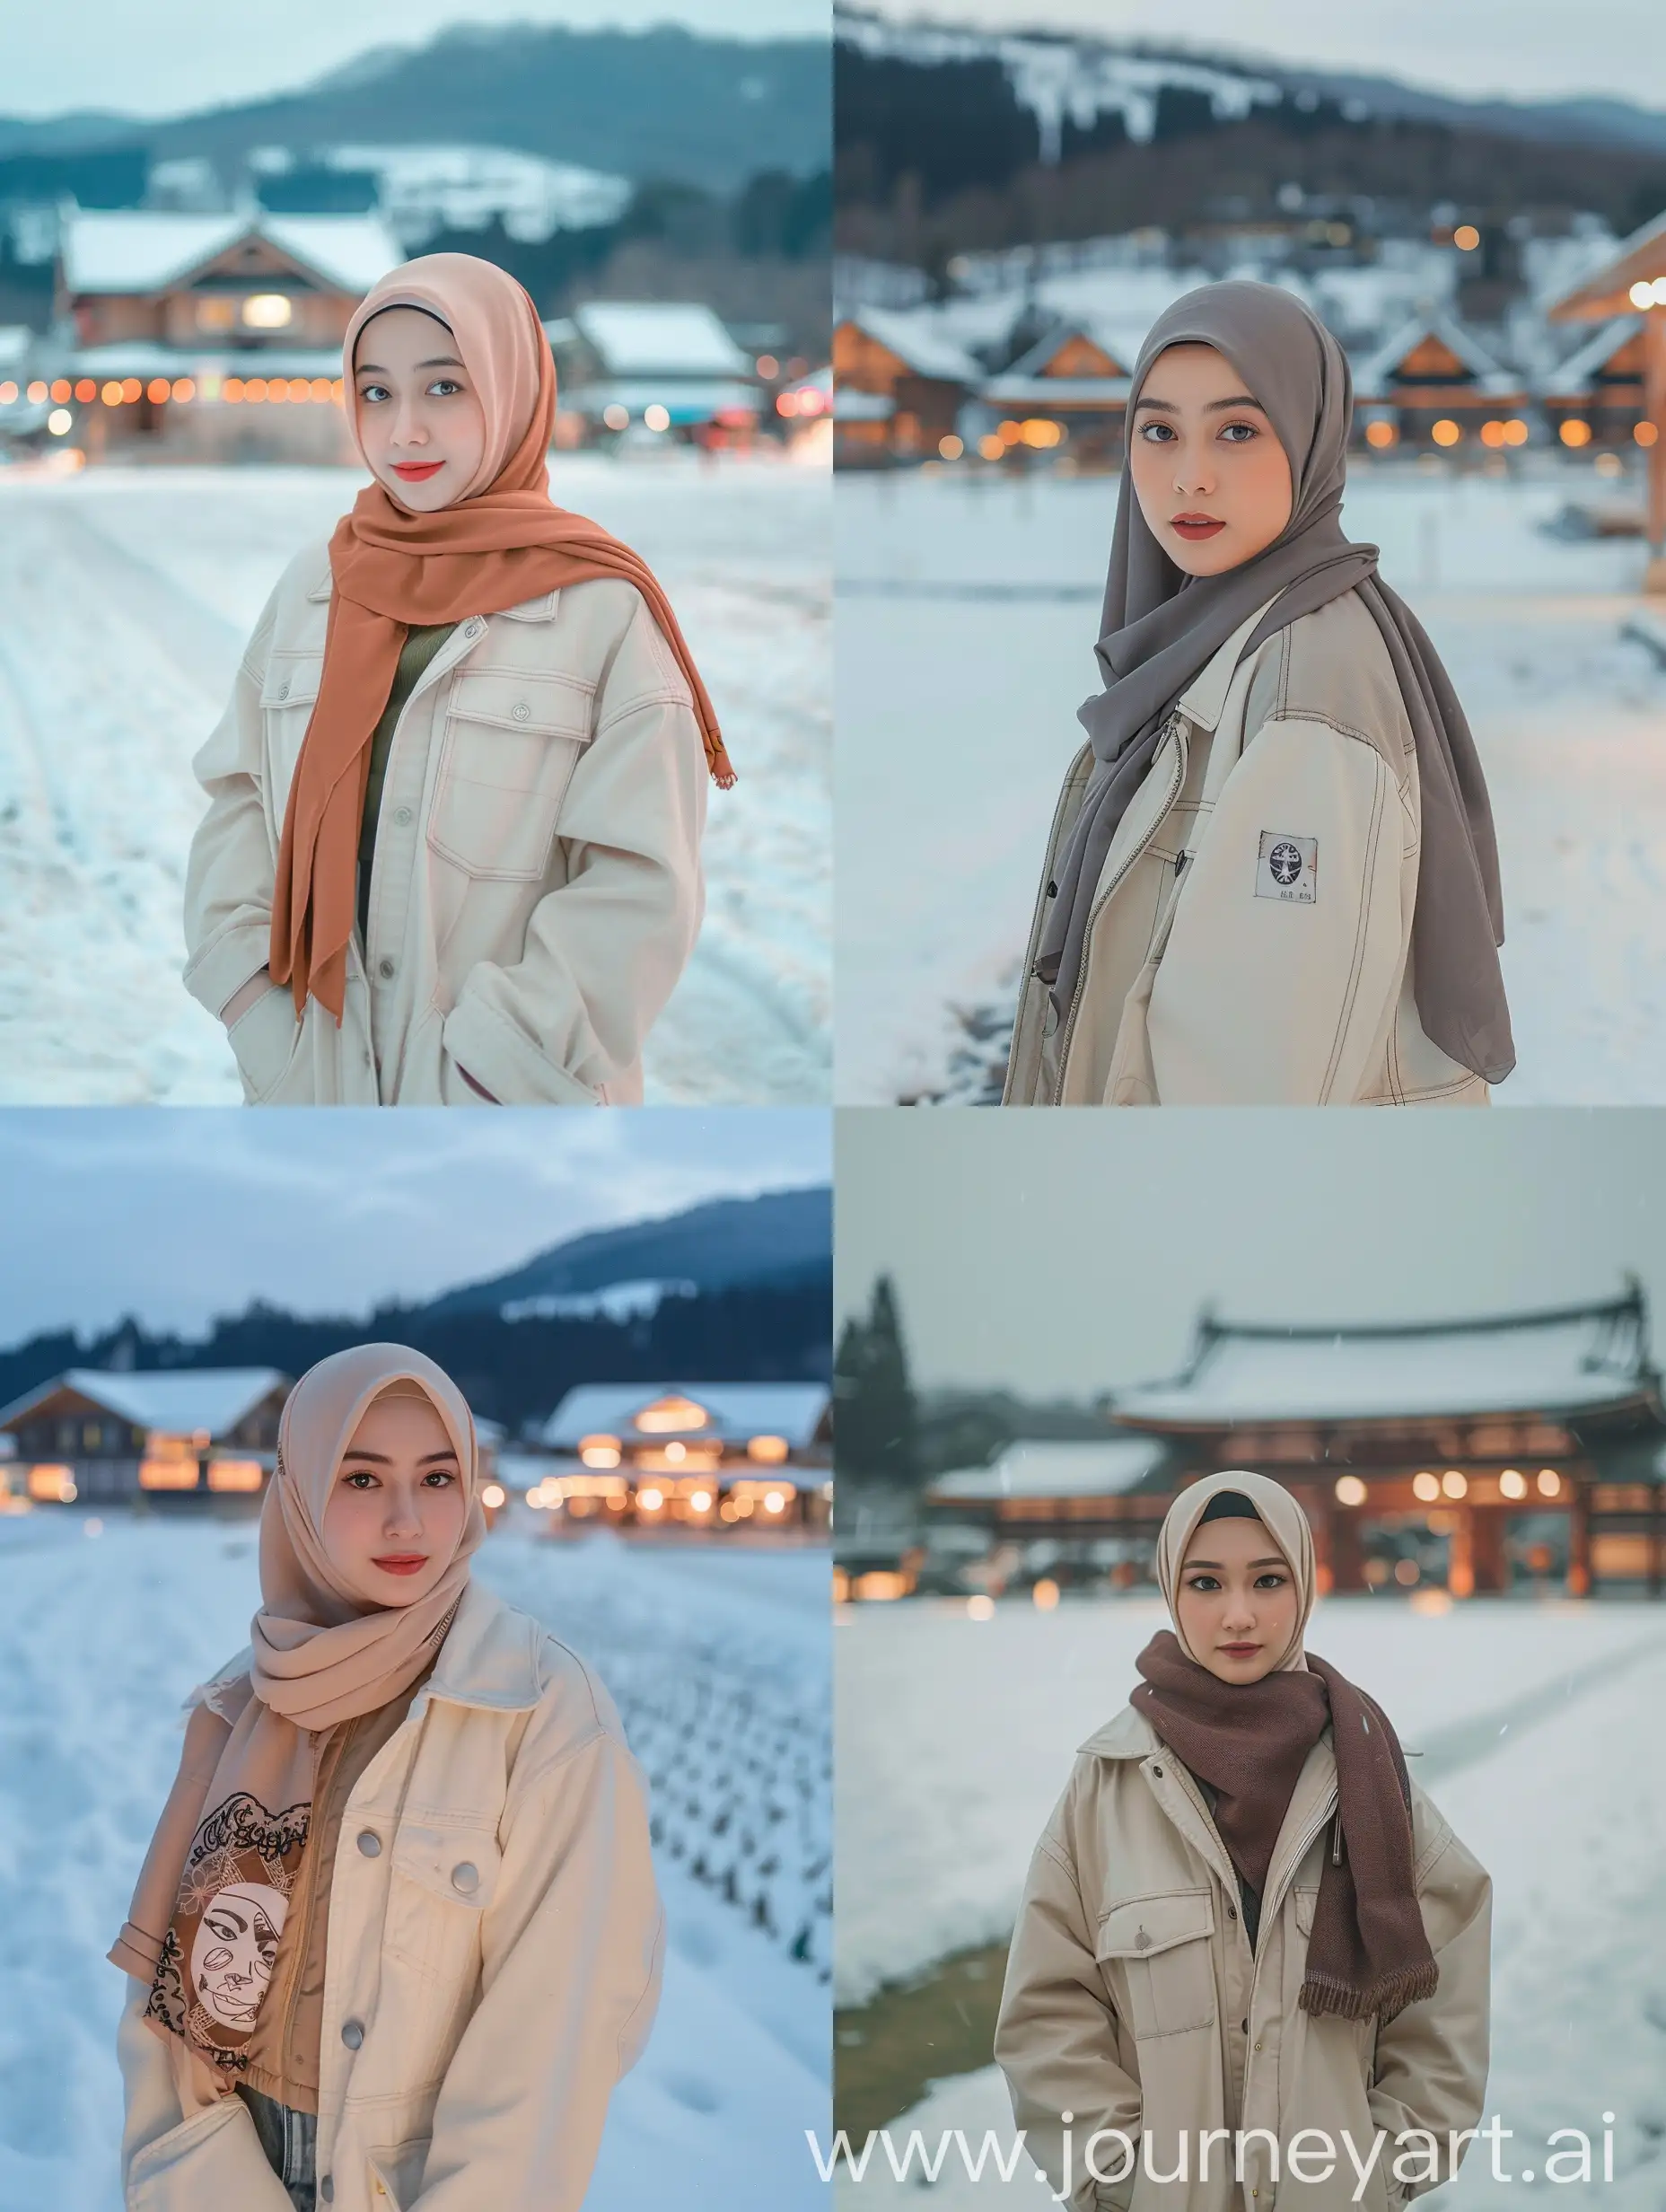 Indonesian-Woman-in-Hijab-Standing-in-Snow-Park-with-Traditional-Japanese-Buildings-at-Night